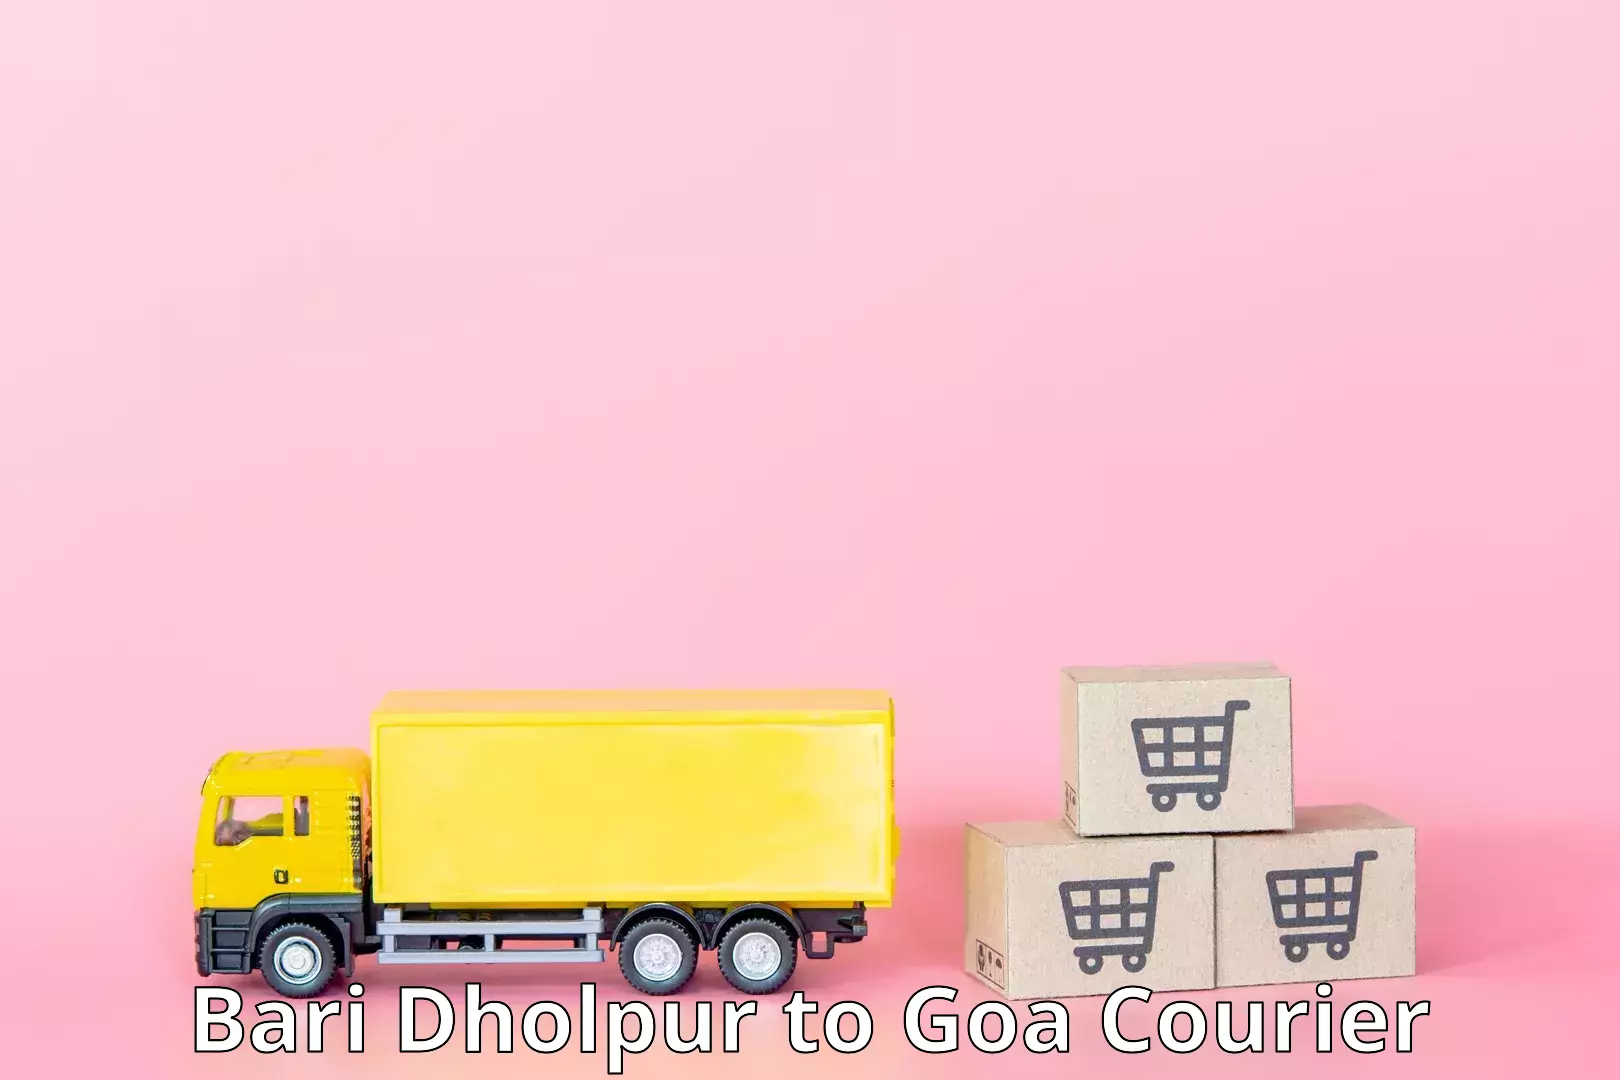 Global shipping solutions Bari Dholpur to South Goa